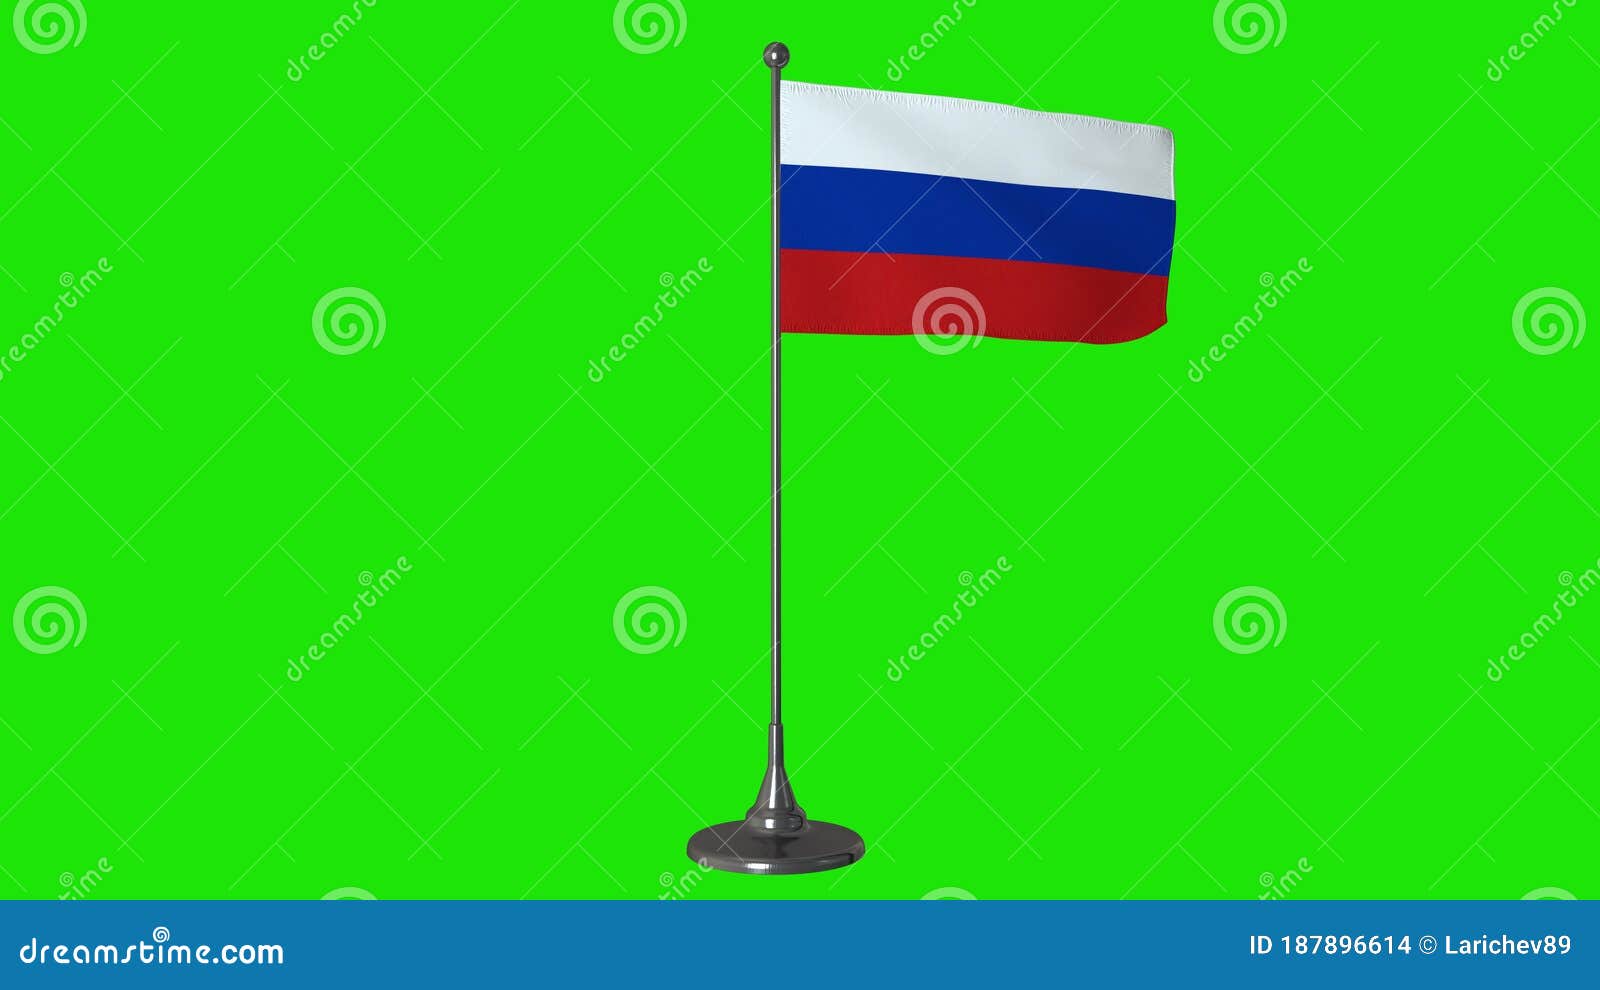 Russia Small Flag, Buy Small Russian Flag